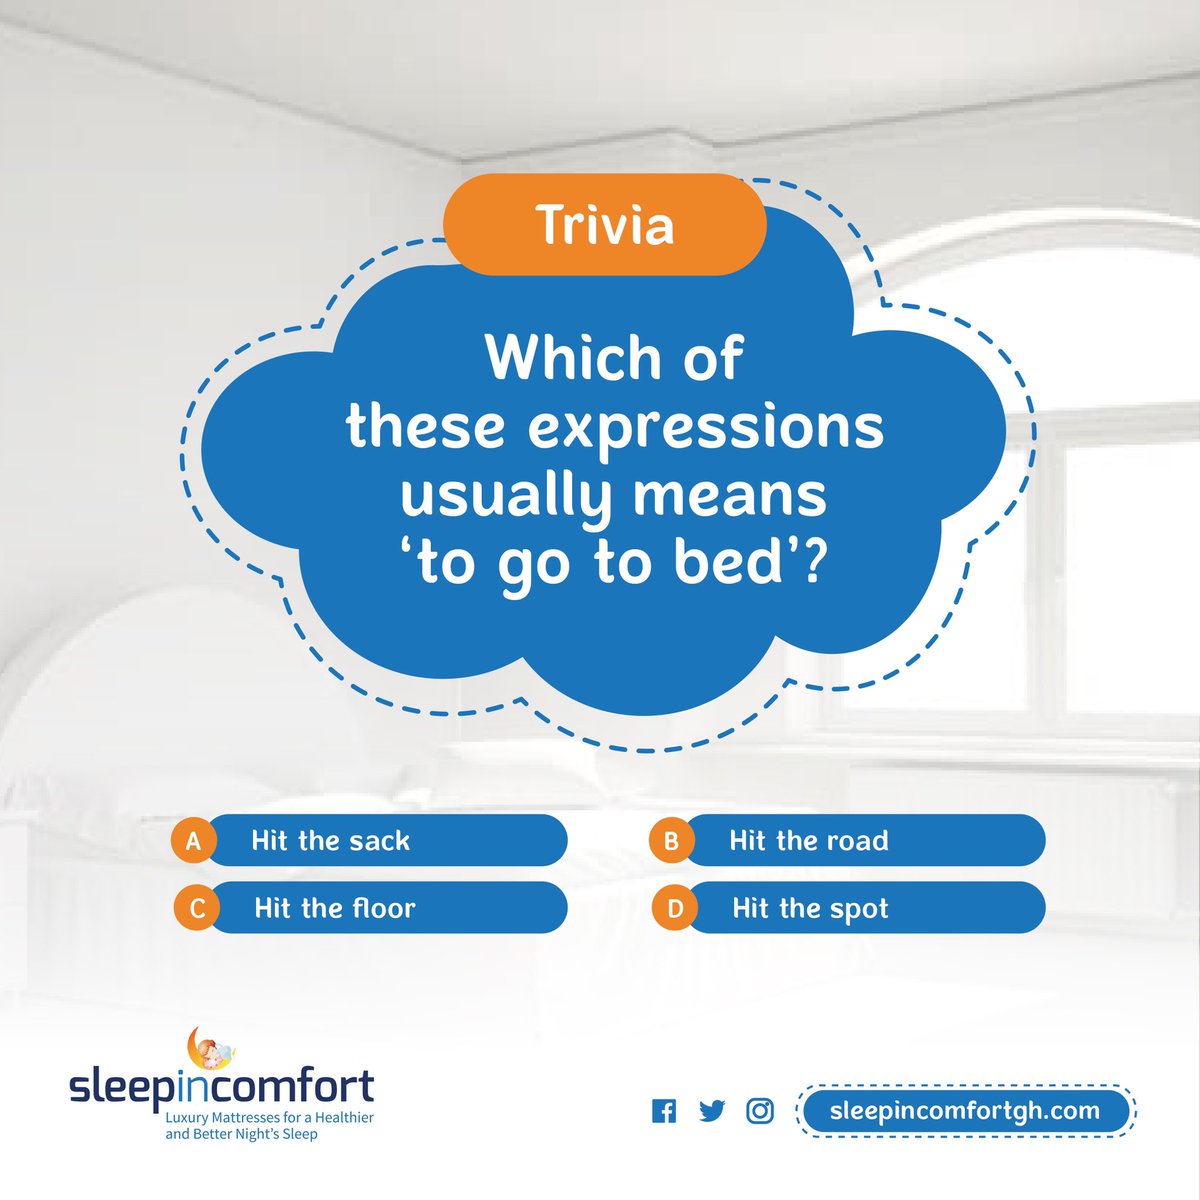 Trivia Night is back🎉
Which of these expressions usually mean go to bed?
First answer wins😎

#trivianight #sleepincomfort #sleeptrivia